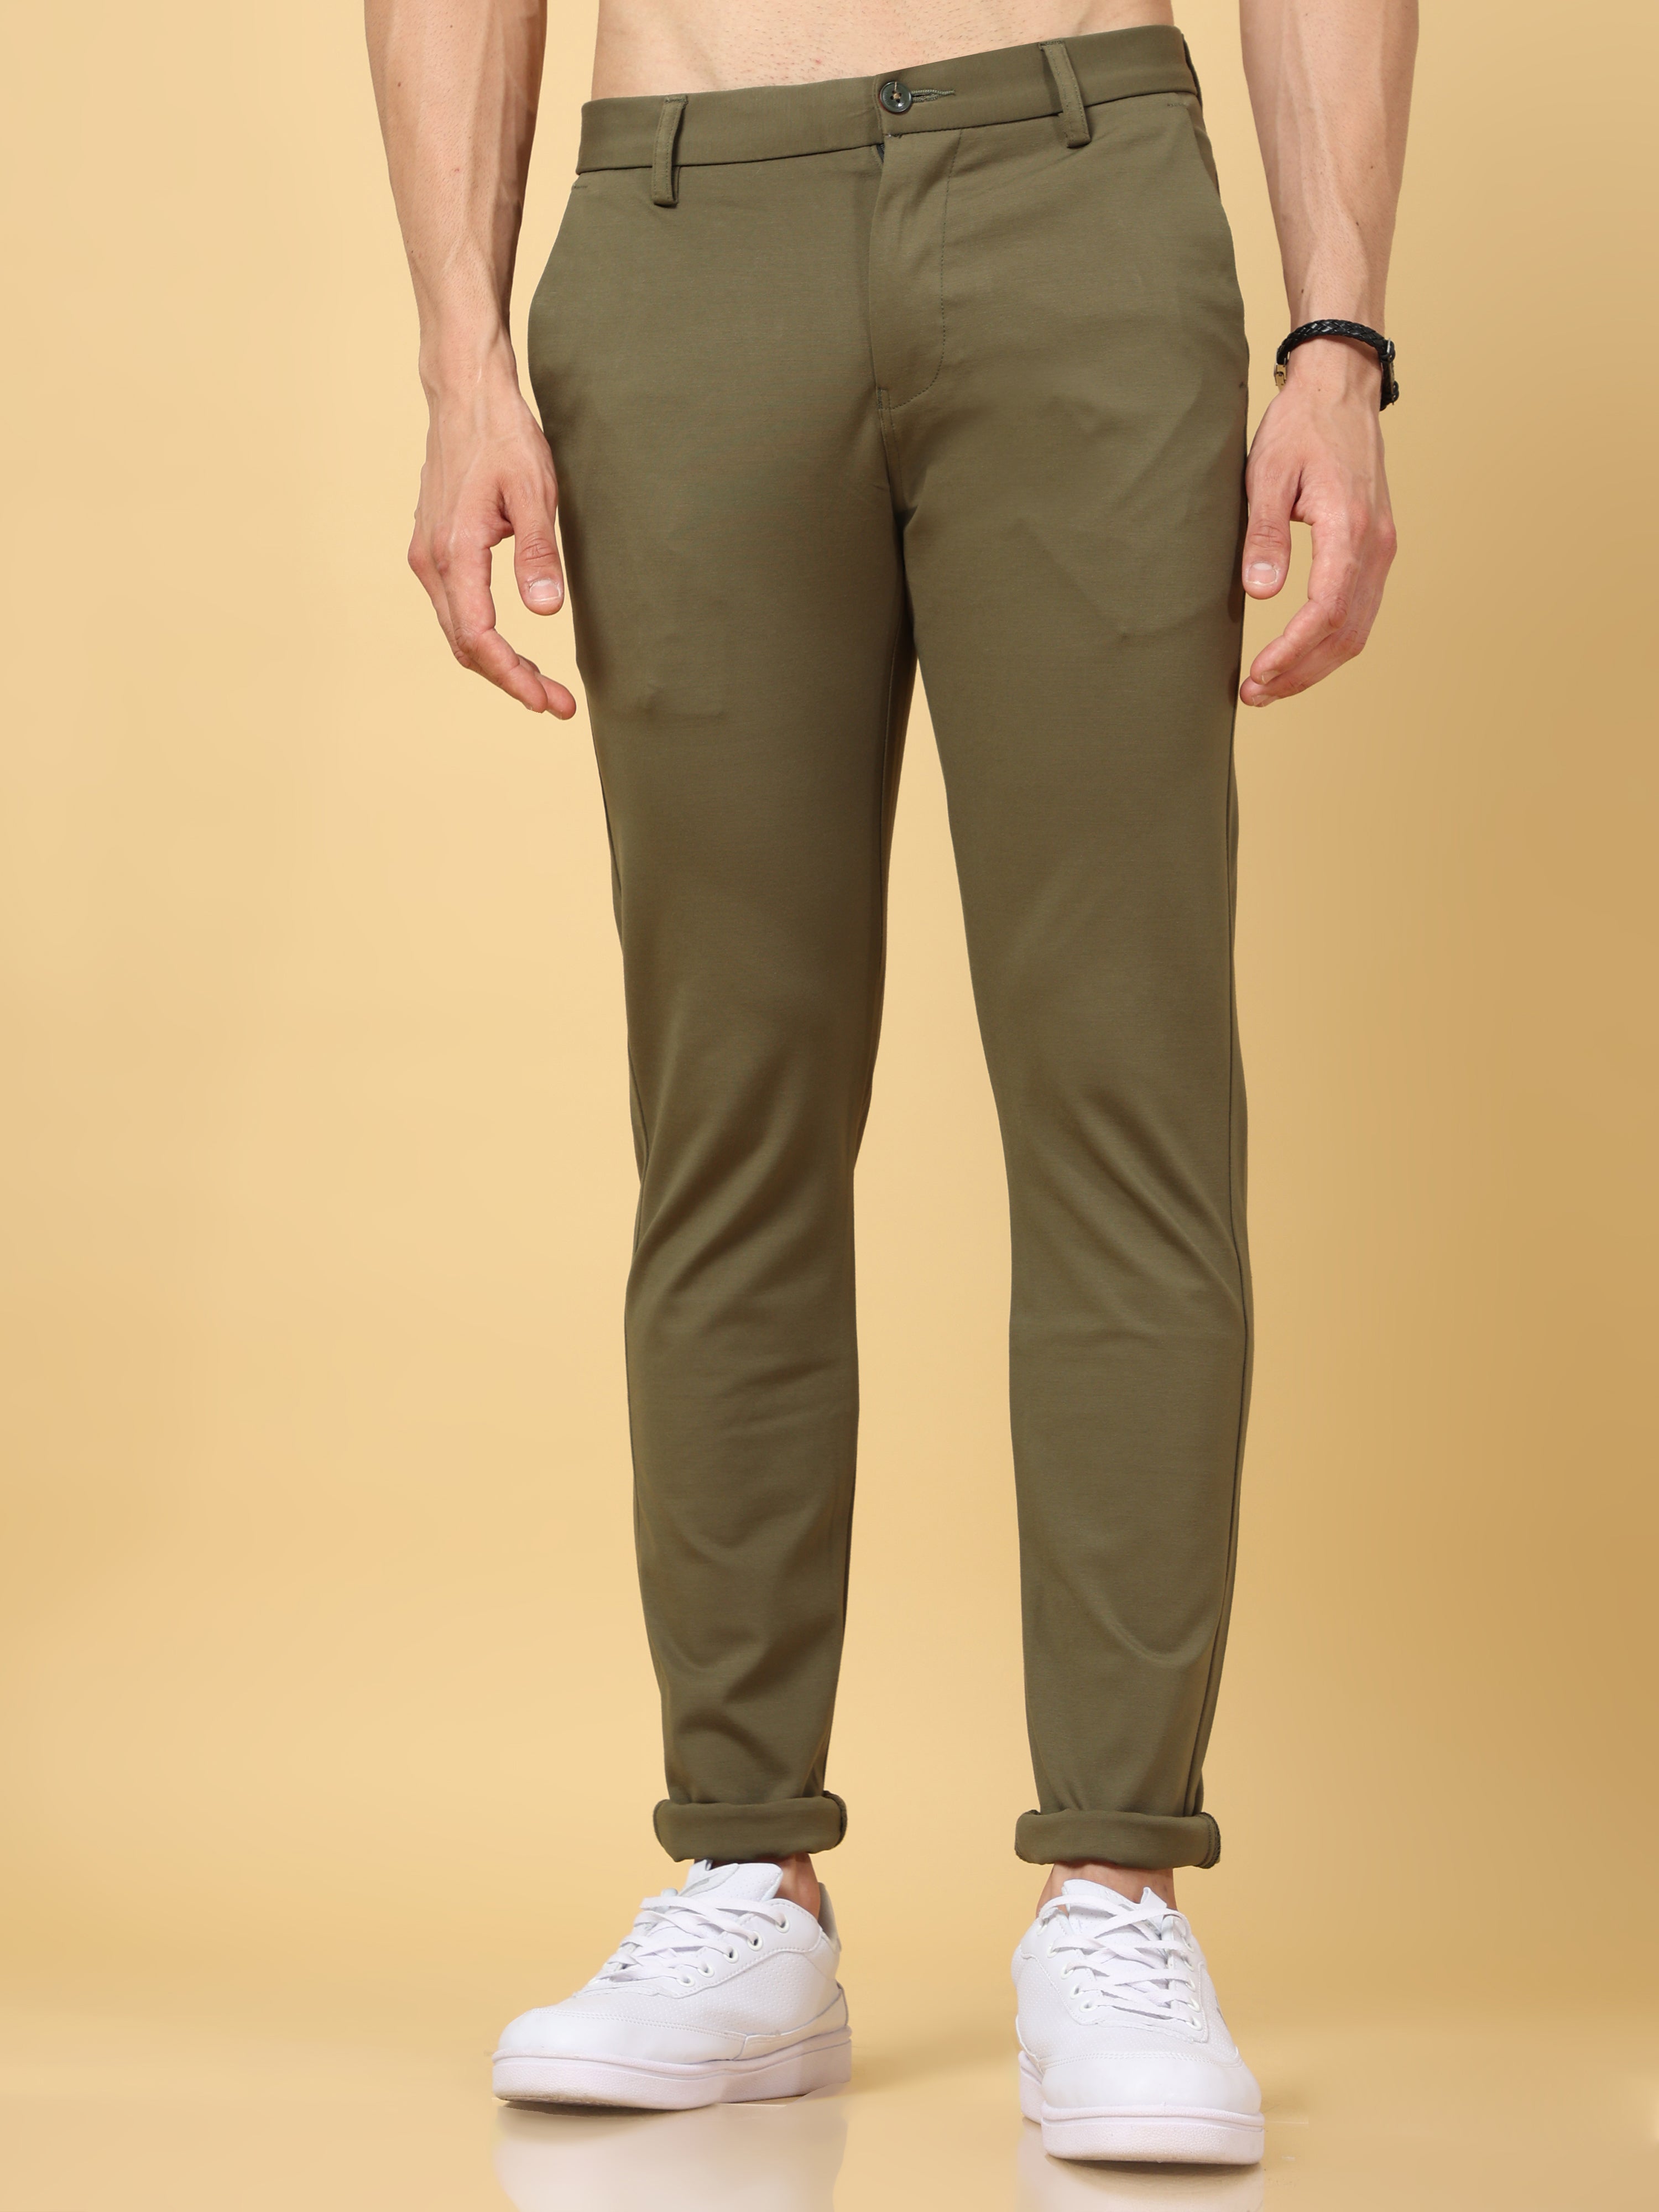 Stretchable Trousers Capris Track - Buy Stretchable Trousers Capris Track  online in India